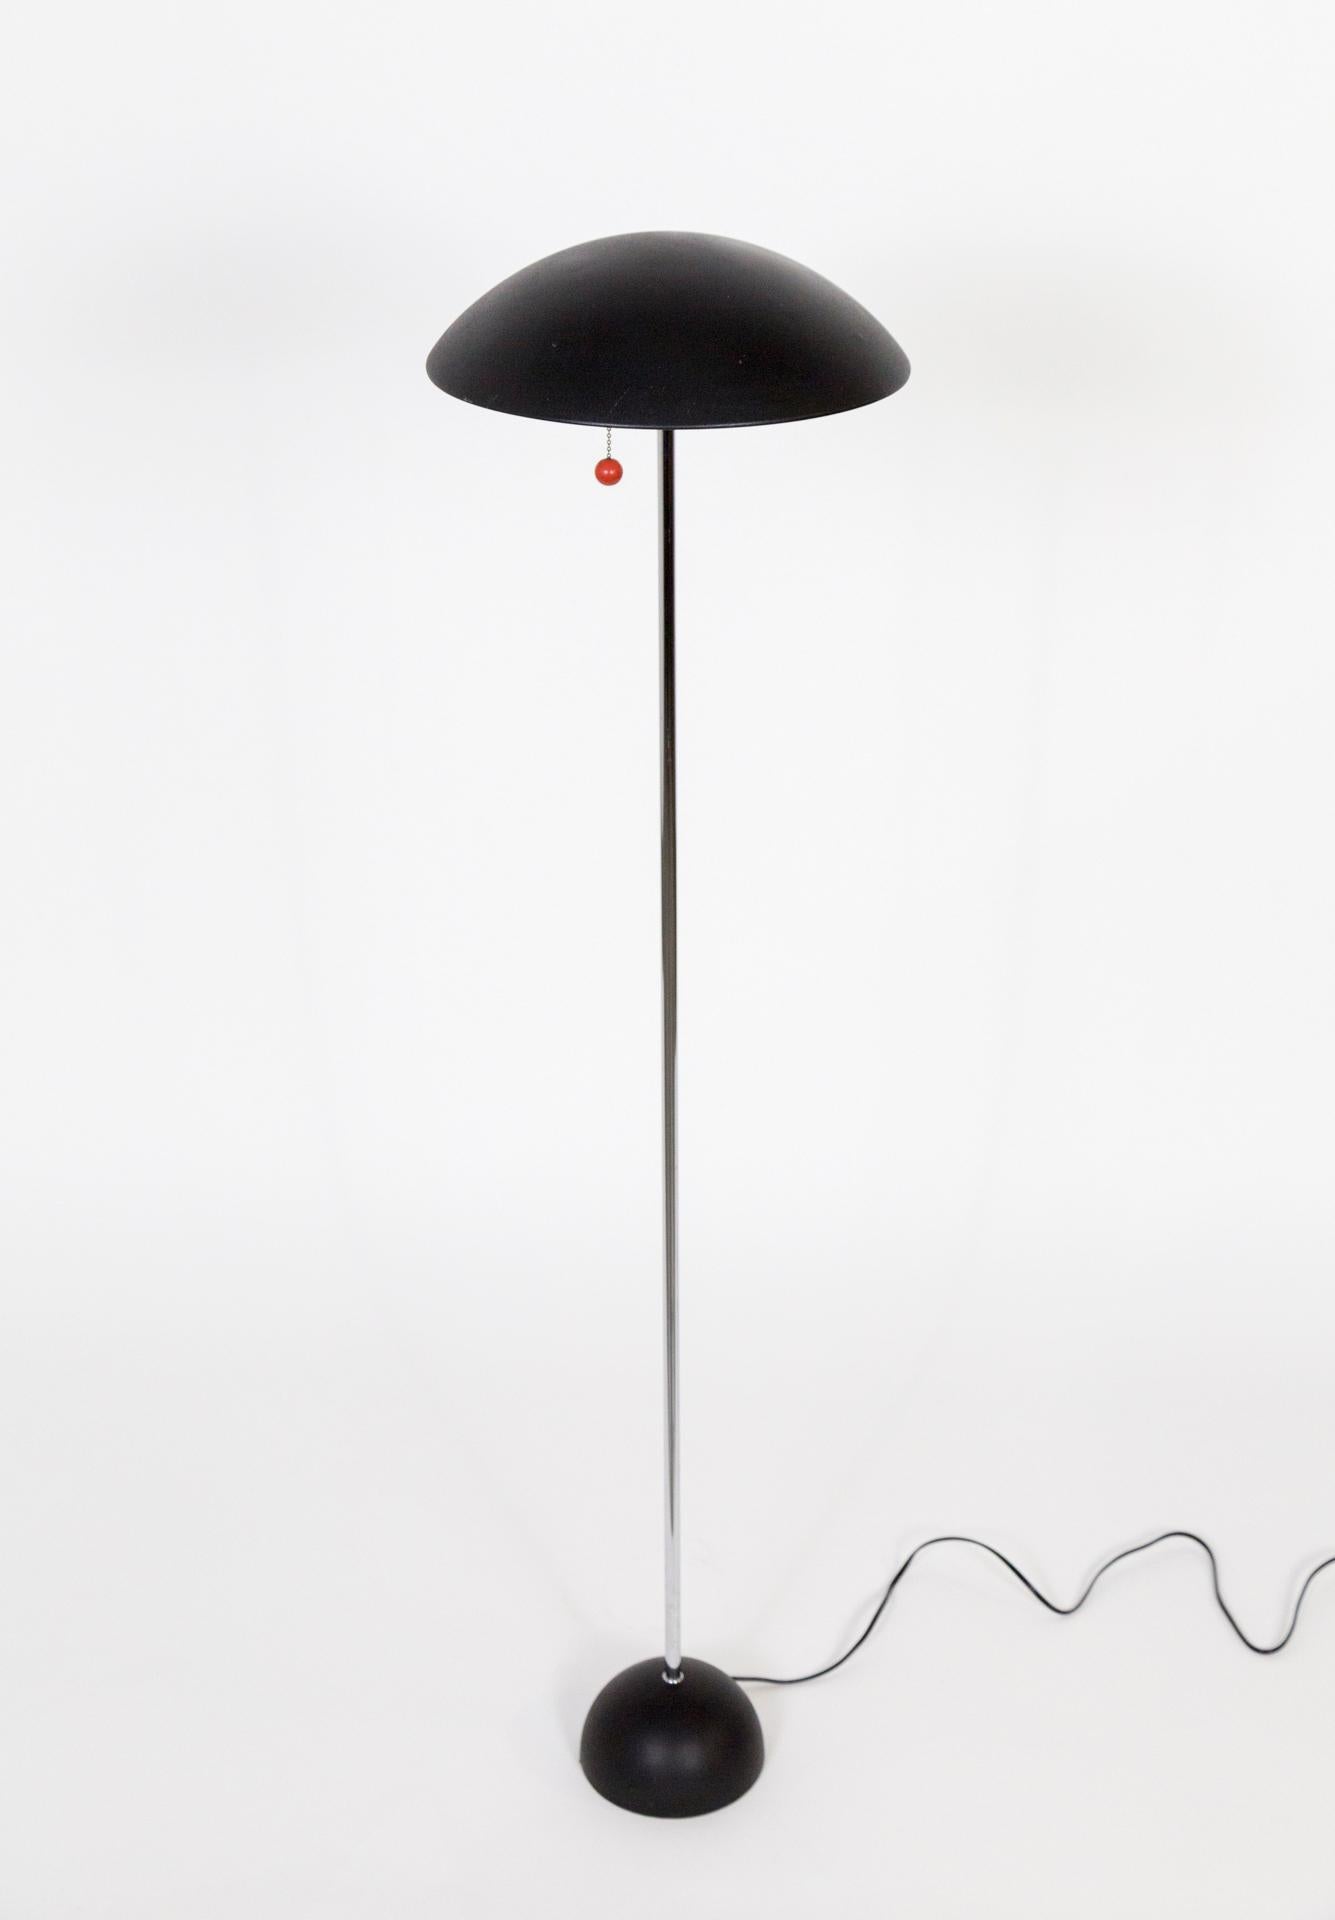 A mid-century floor lamp with a down-light and black, metal, dome shade and pull chain with a red ball detail.  It has a slender, chrome stem and a more pronounced, black dome base.  It is perfect next to a desk or end table.  One medium base